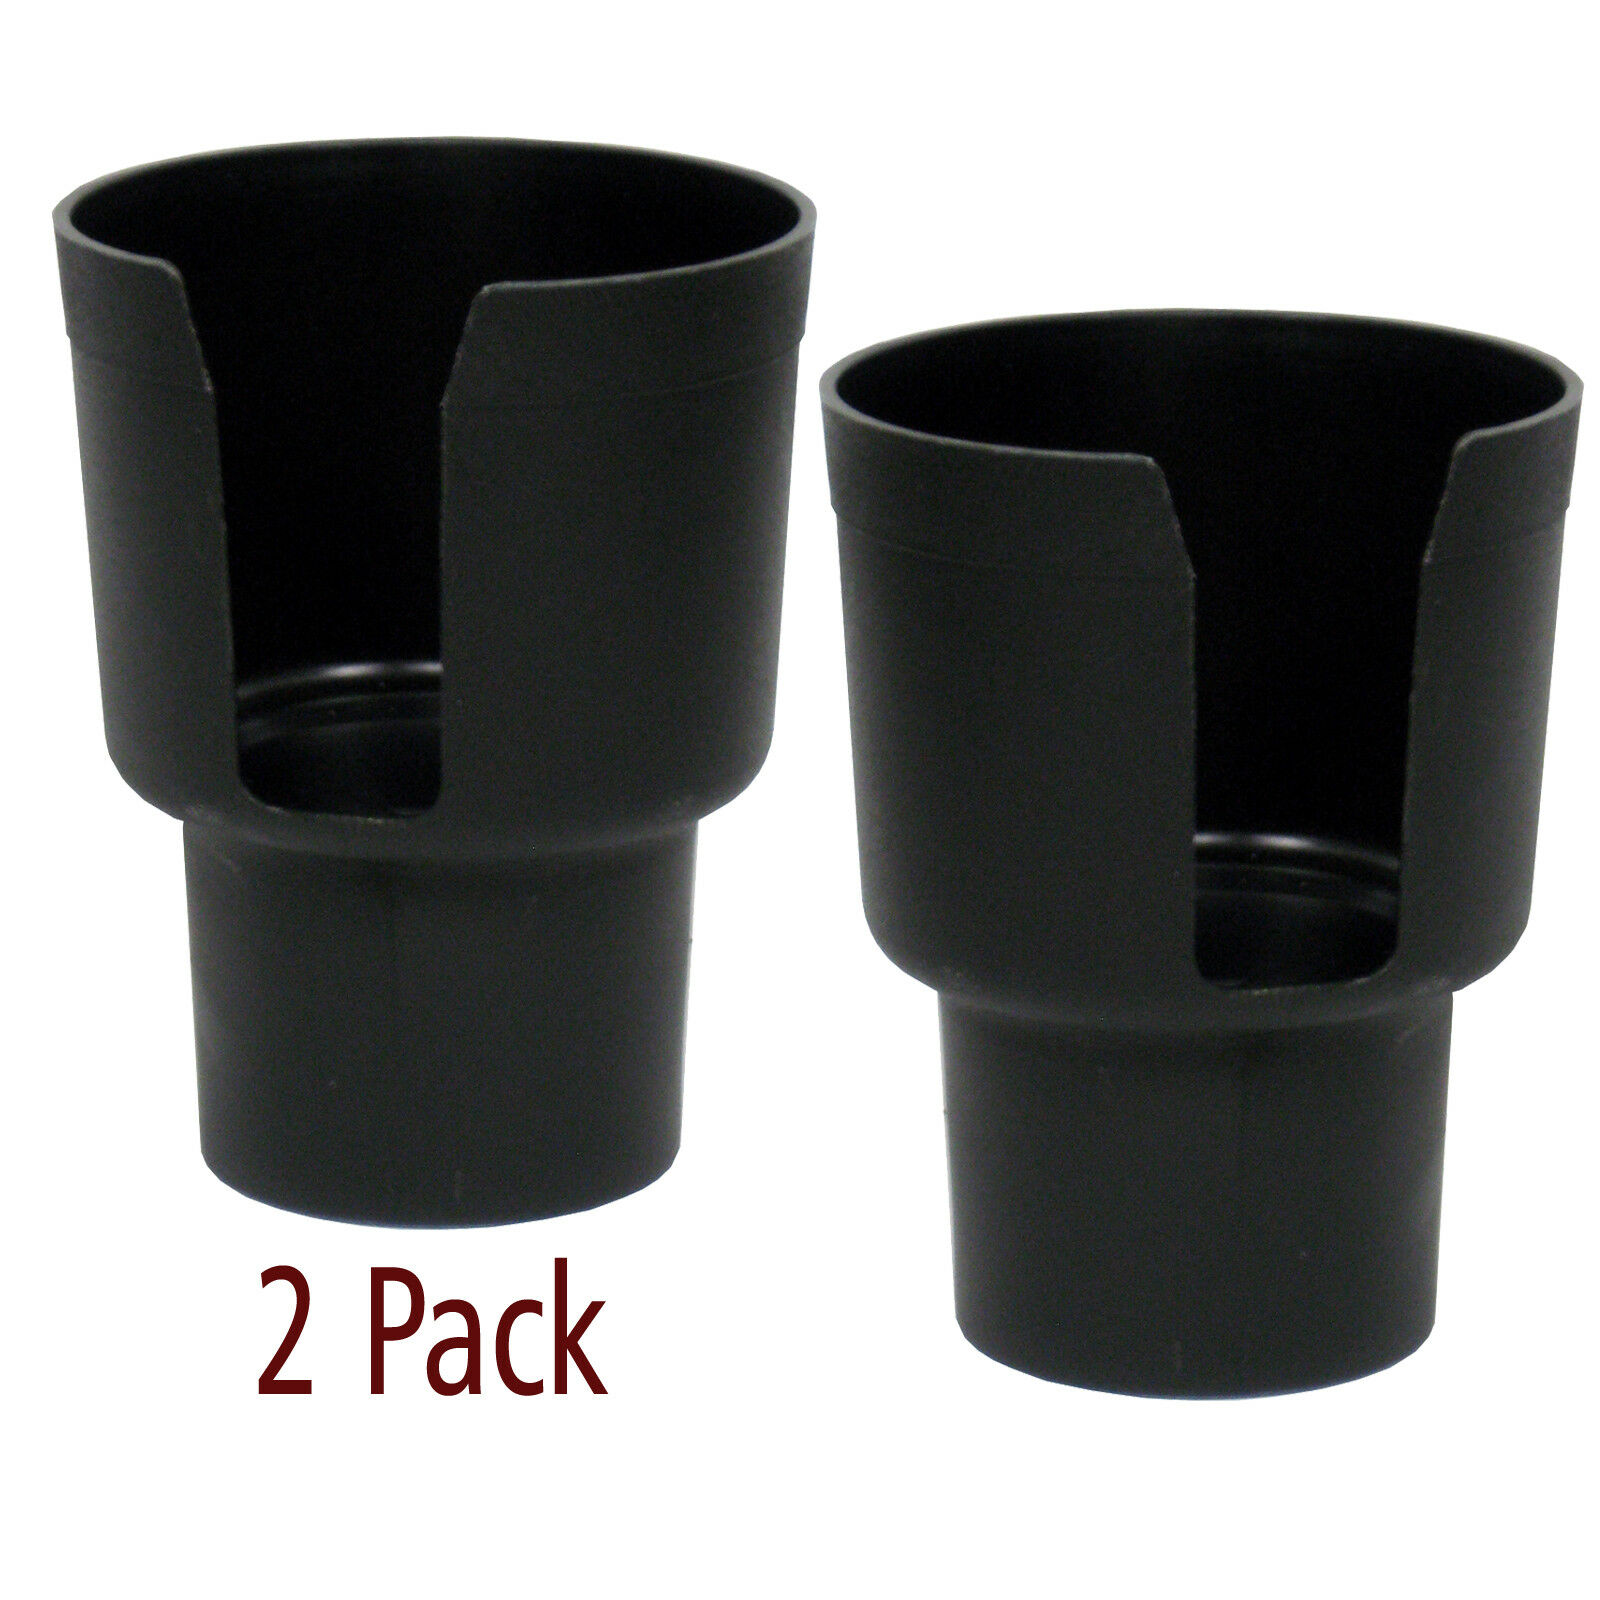 Gadjit Cup Keeper Cup Holder Adapter, Expands Car Cup Holders, Black 2 Pk 52615